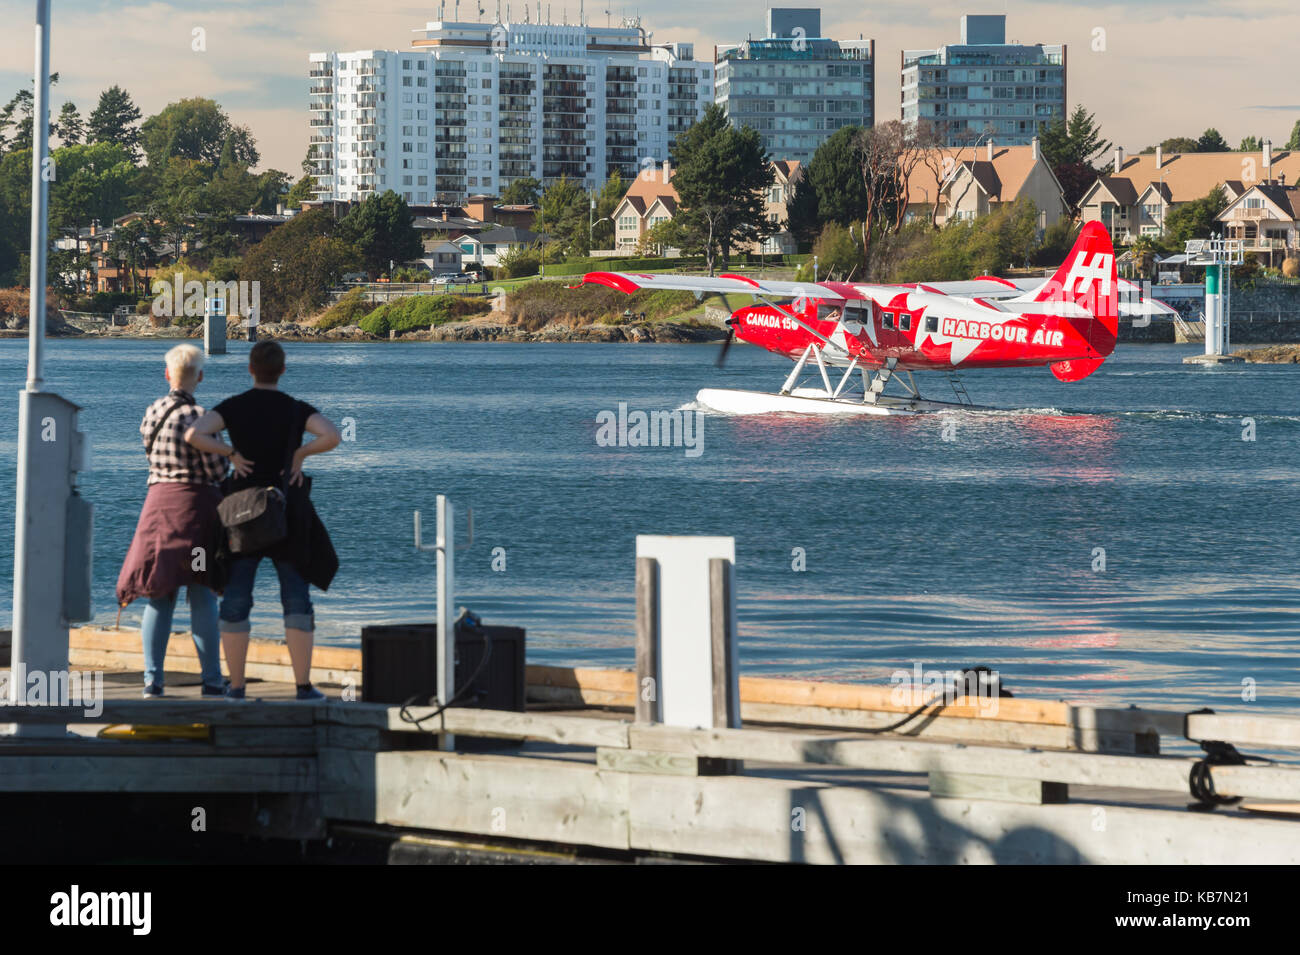 Victoria, British Columbia, Canada - 11 September 2017: a Seaplane painted with the Canadian flag is about to take off Stock Photo